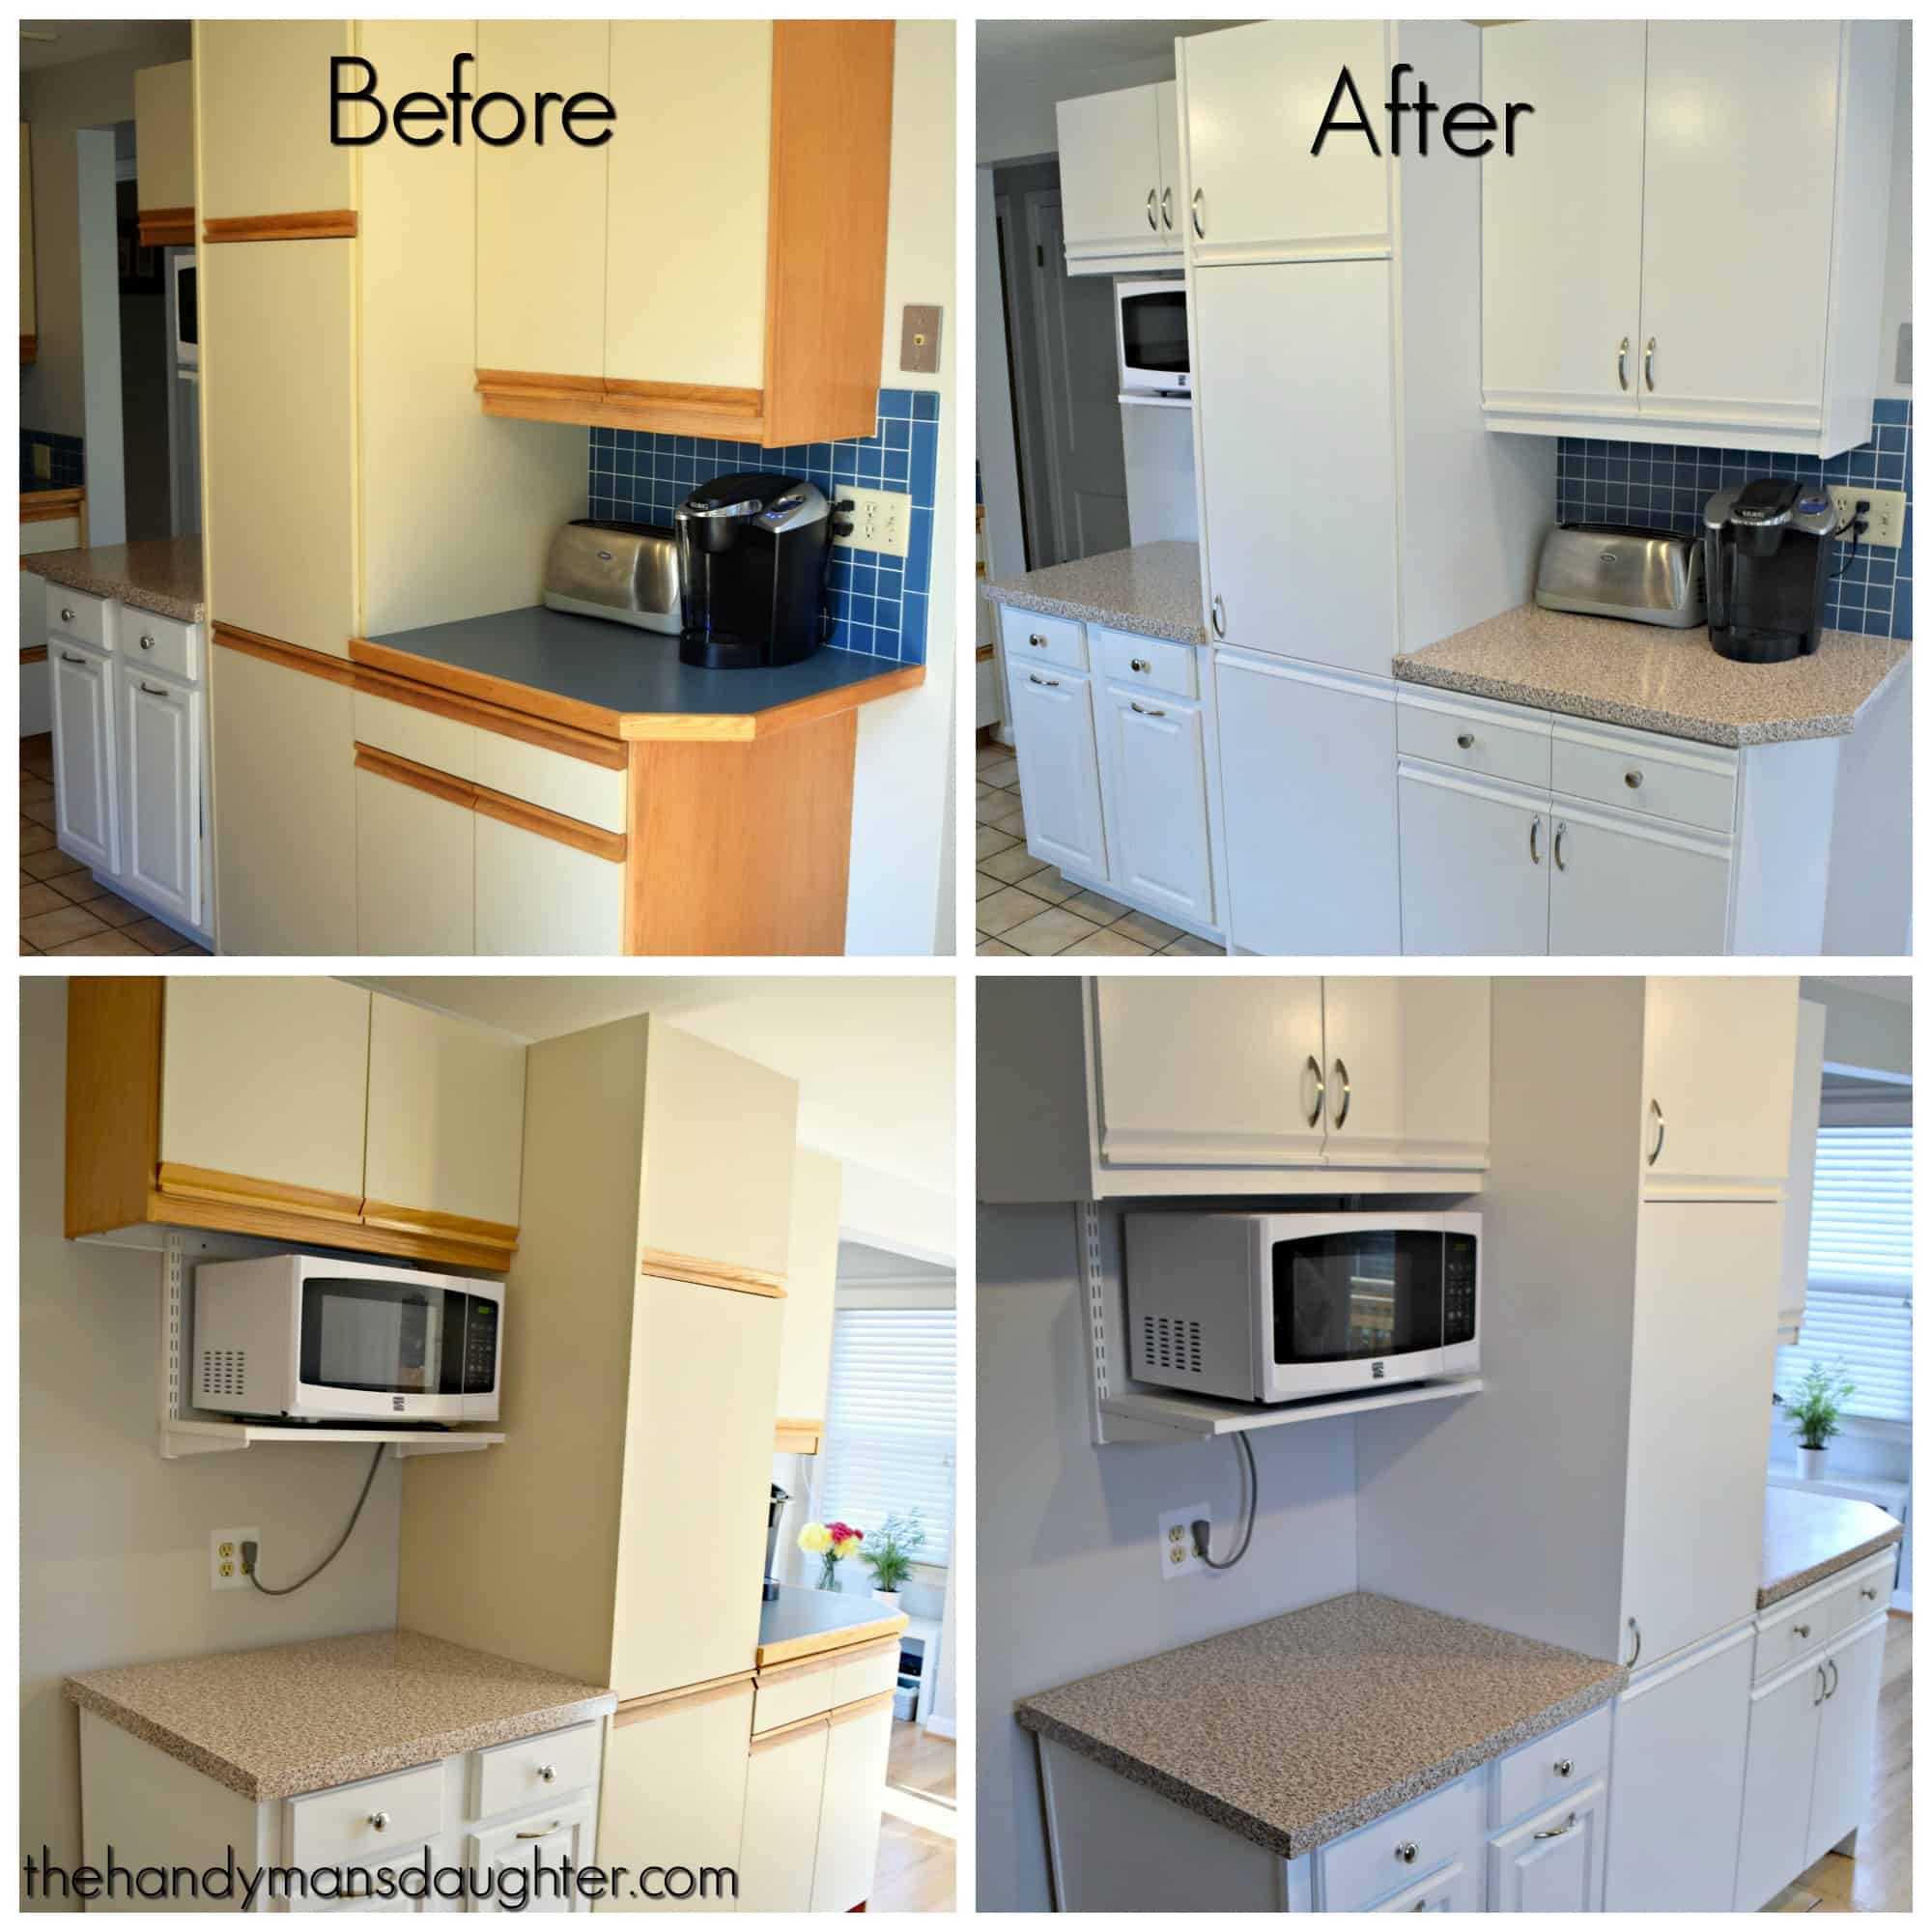 How To Make Old Kitchen Cabinets Look New Again